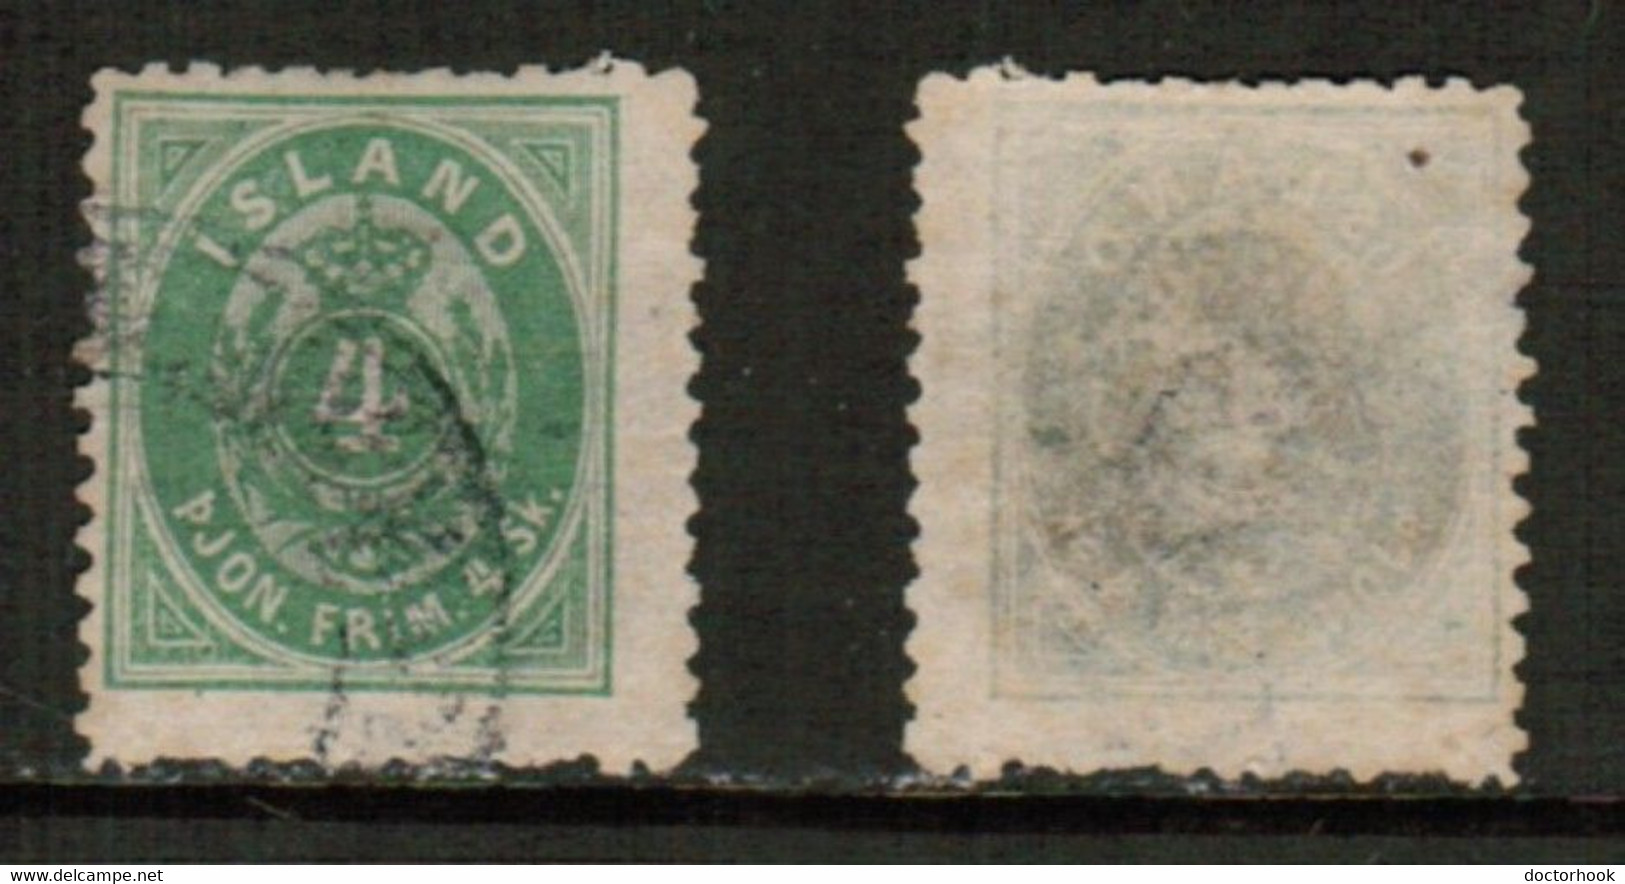 DENMARK   Scott # O 3 USED (CONDITION AS PER SCAN) (Stamp Scan # 867-17) - Officials